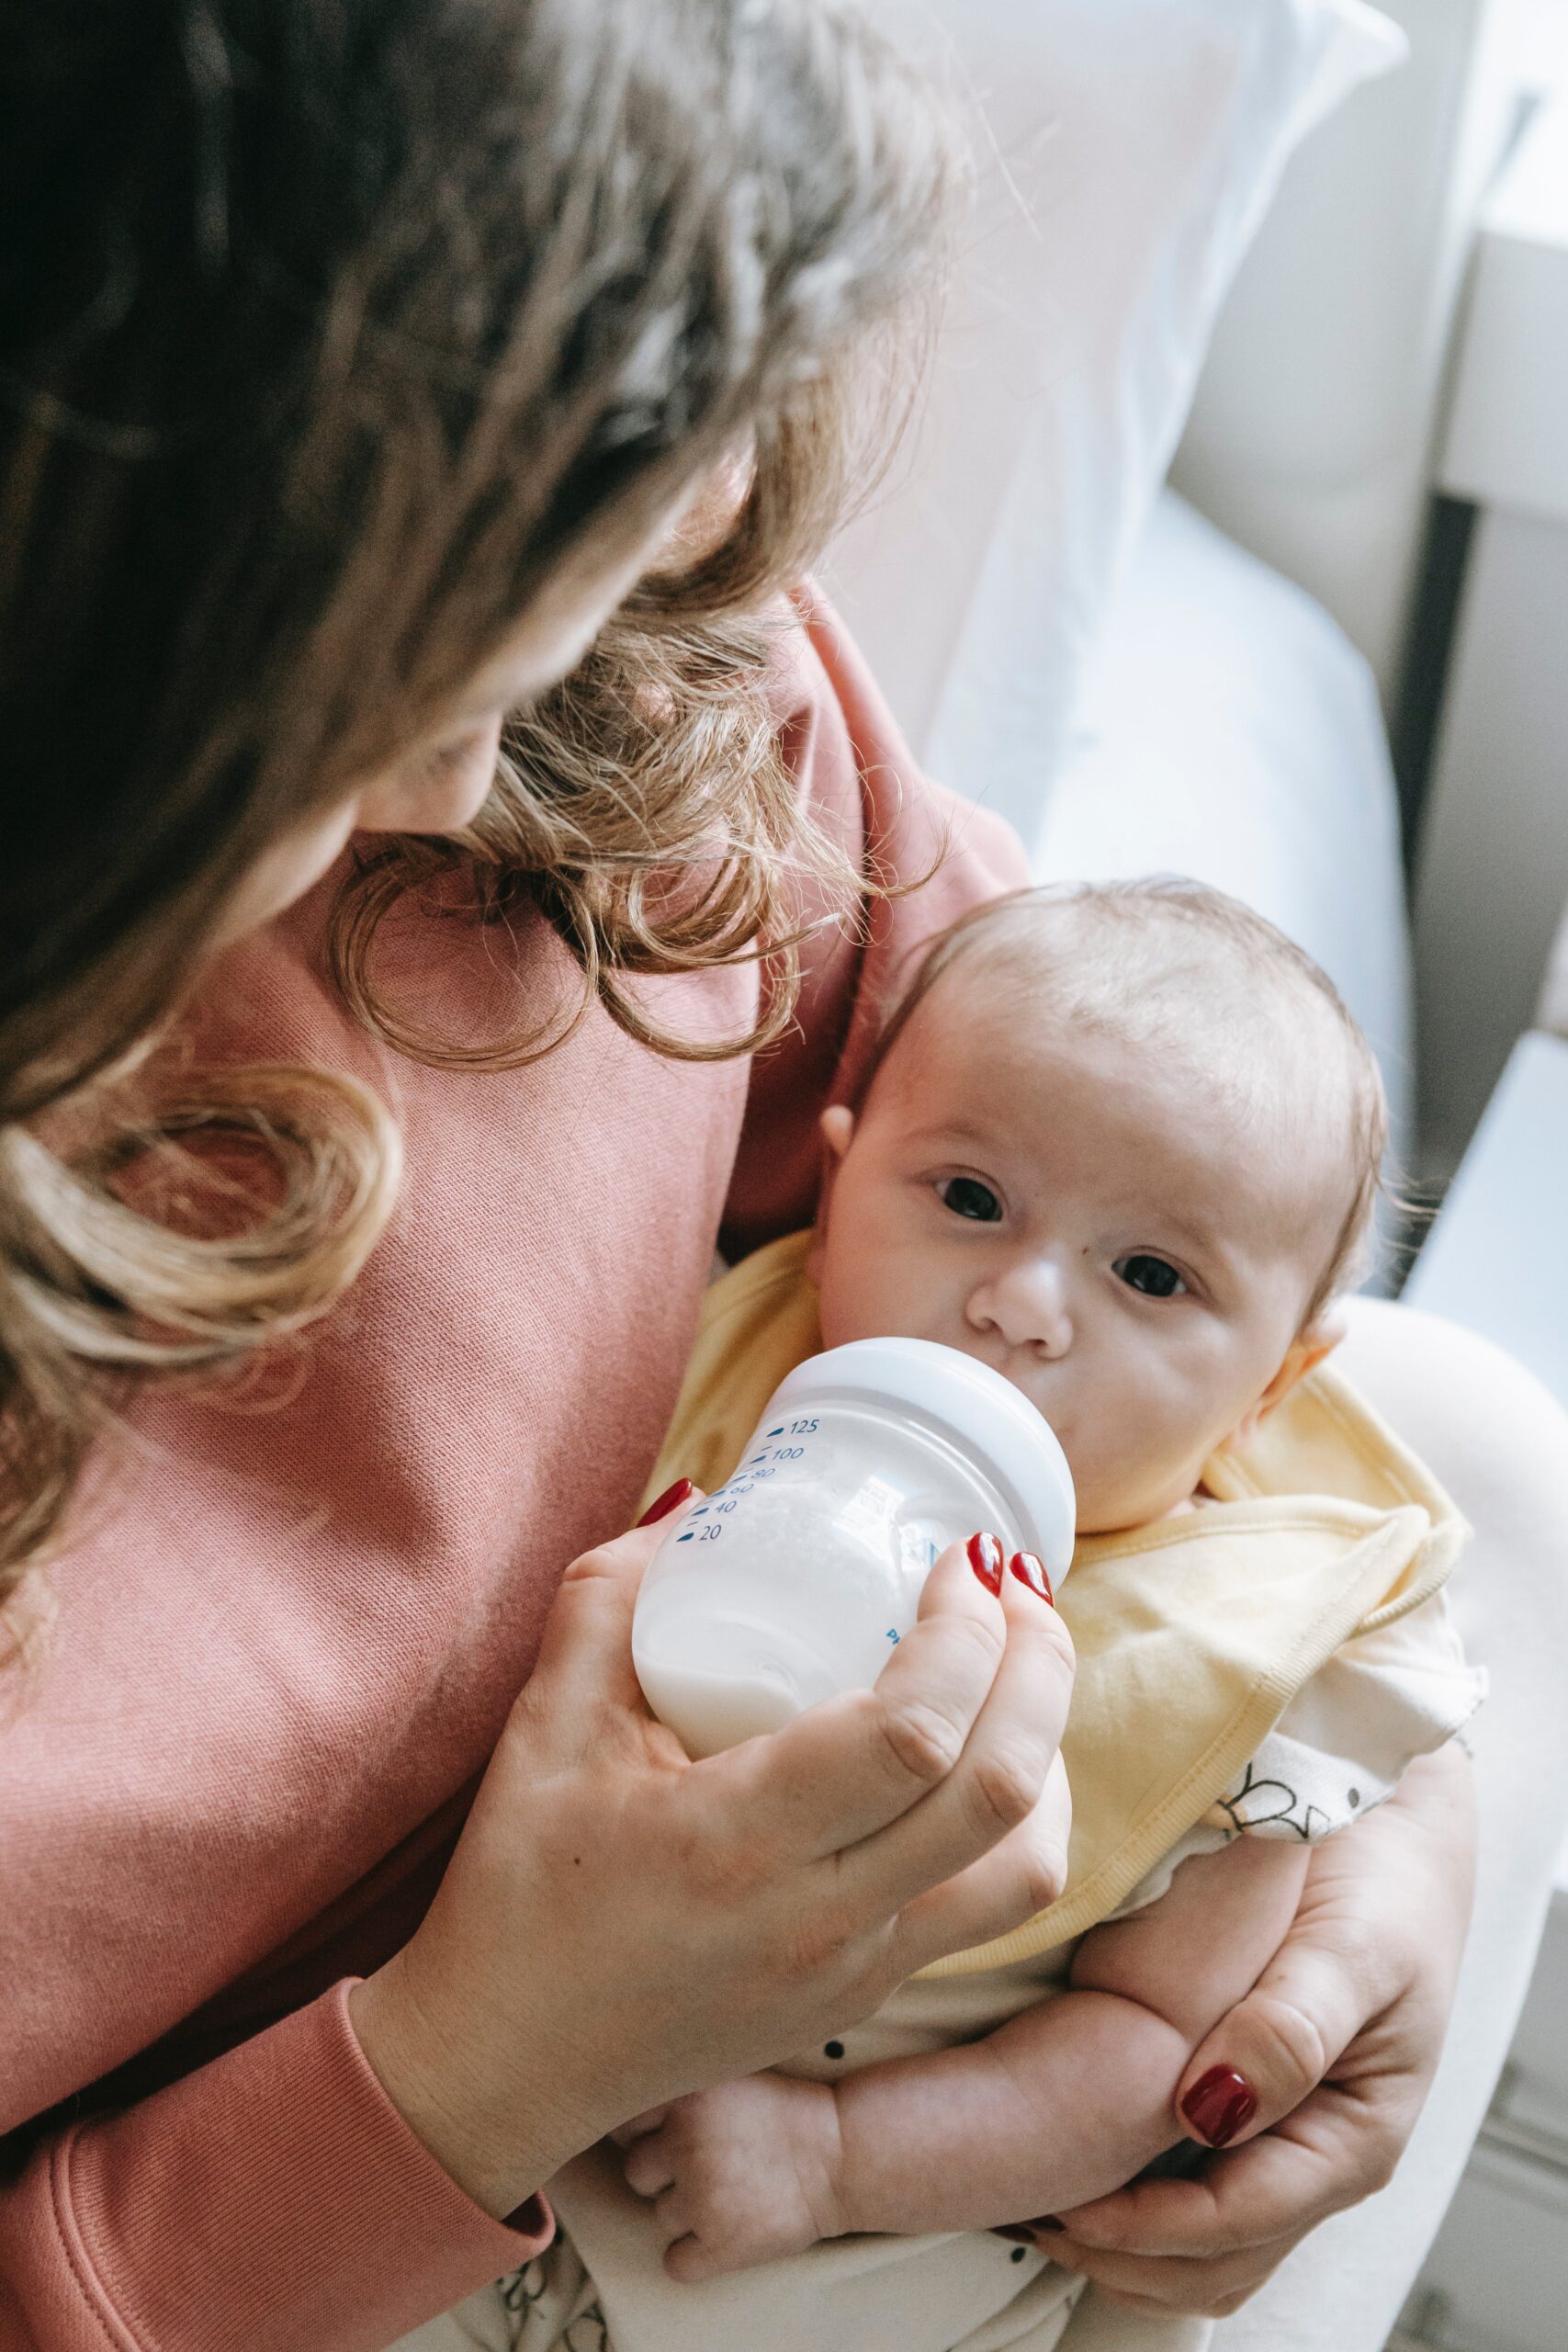 Newborn care specialist attentively giving milk to a baby with a feeding bottle, showcasing the specialized, 24 7 supportive care provided by Lifetime of Love Nannies